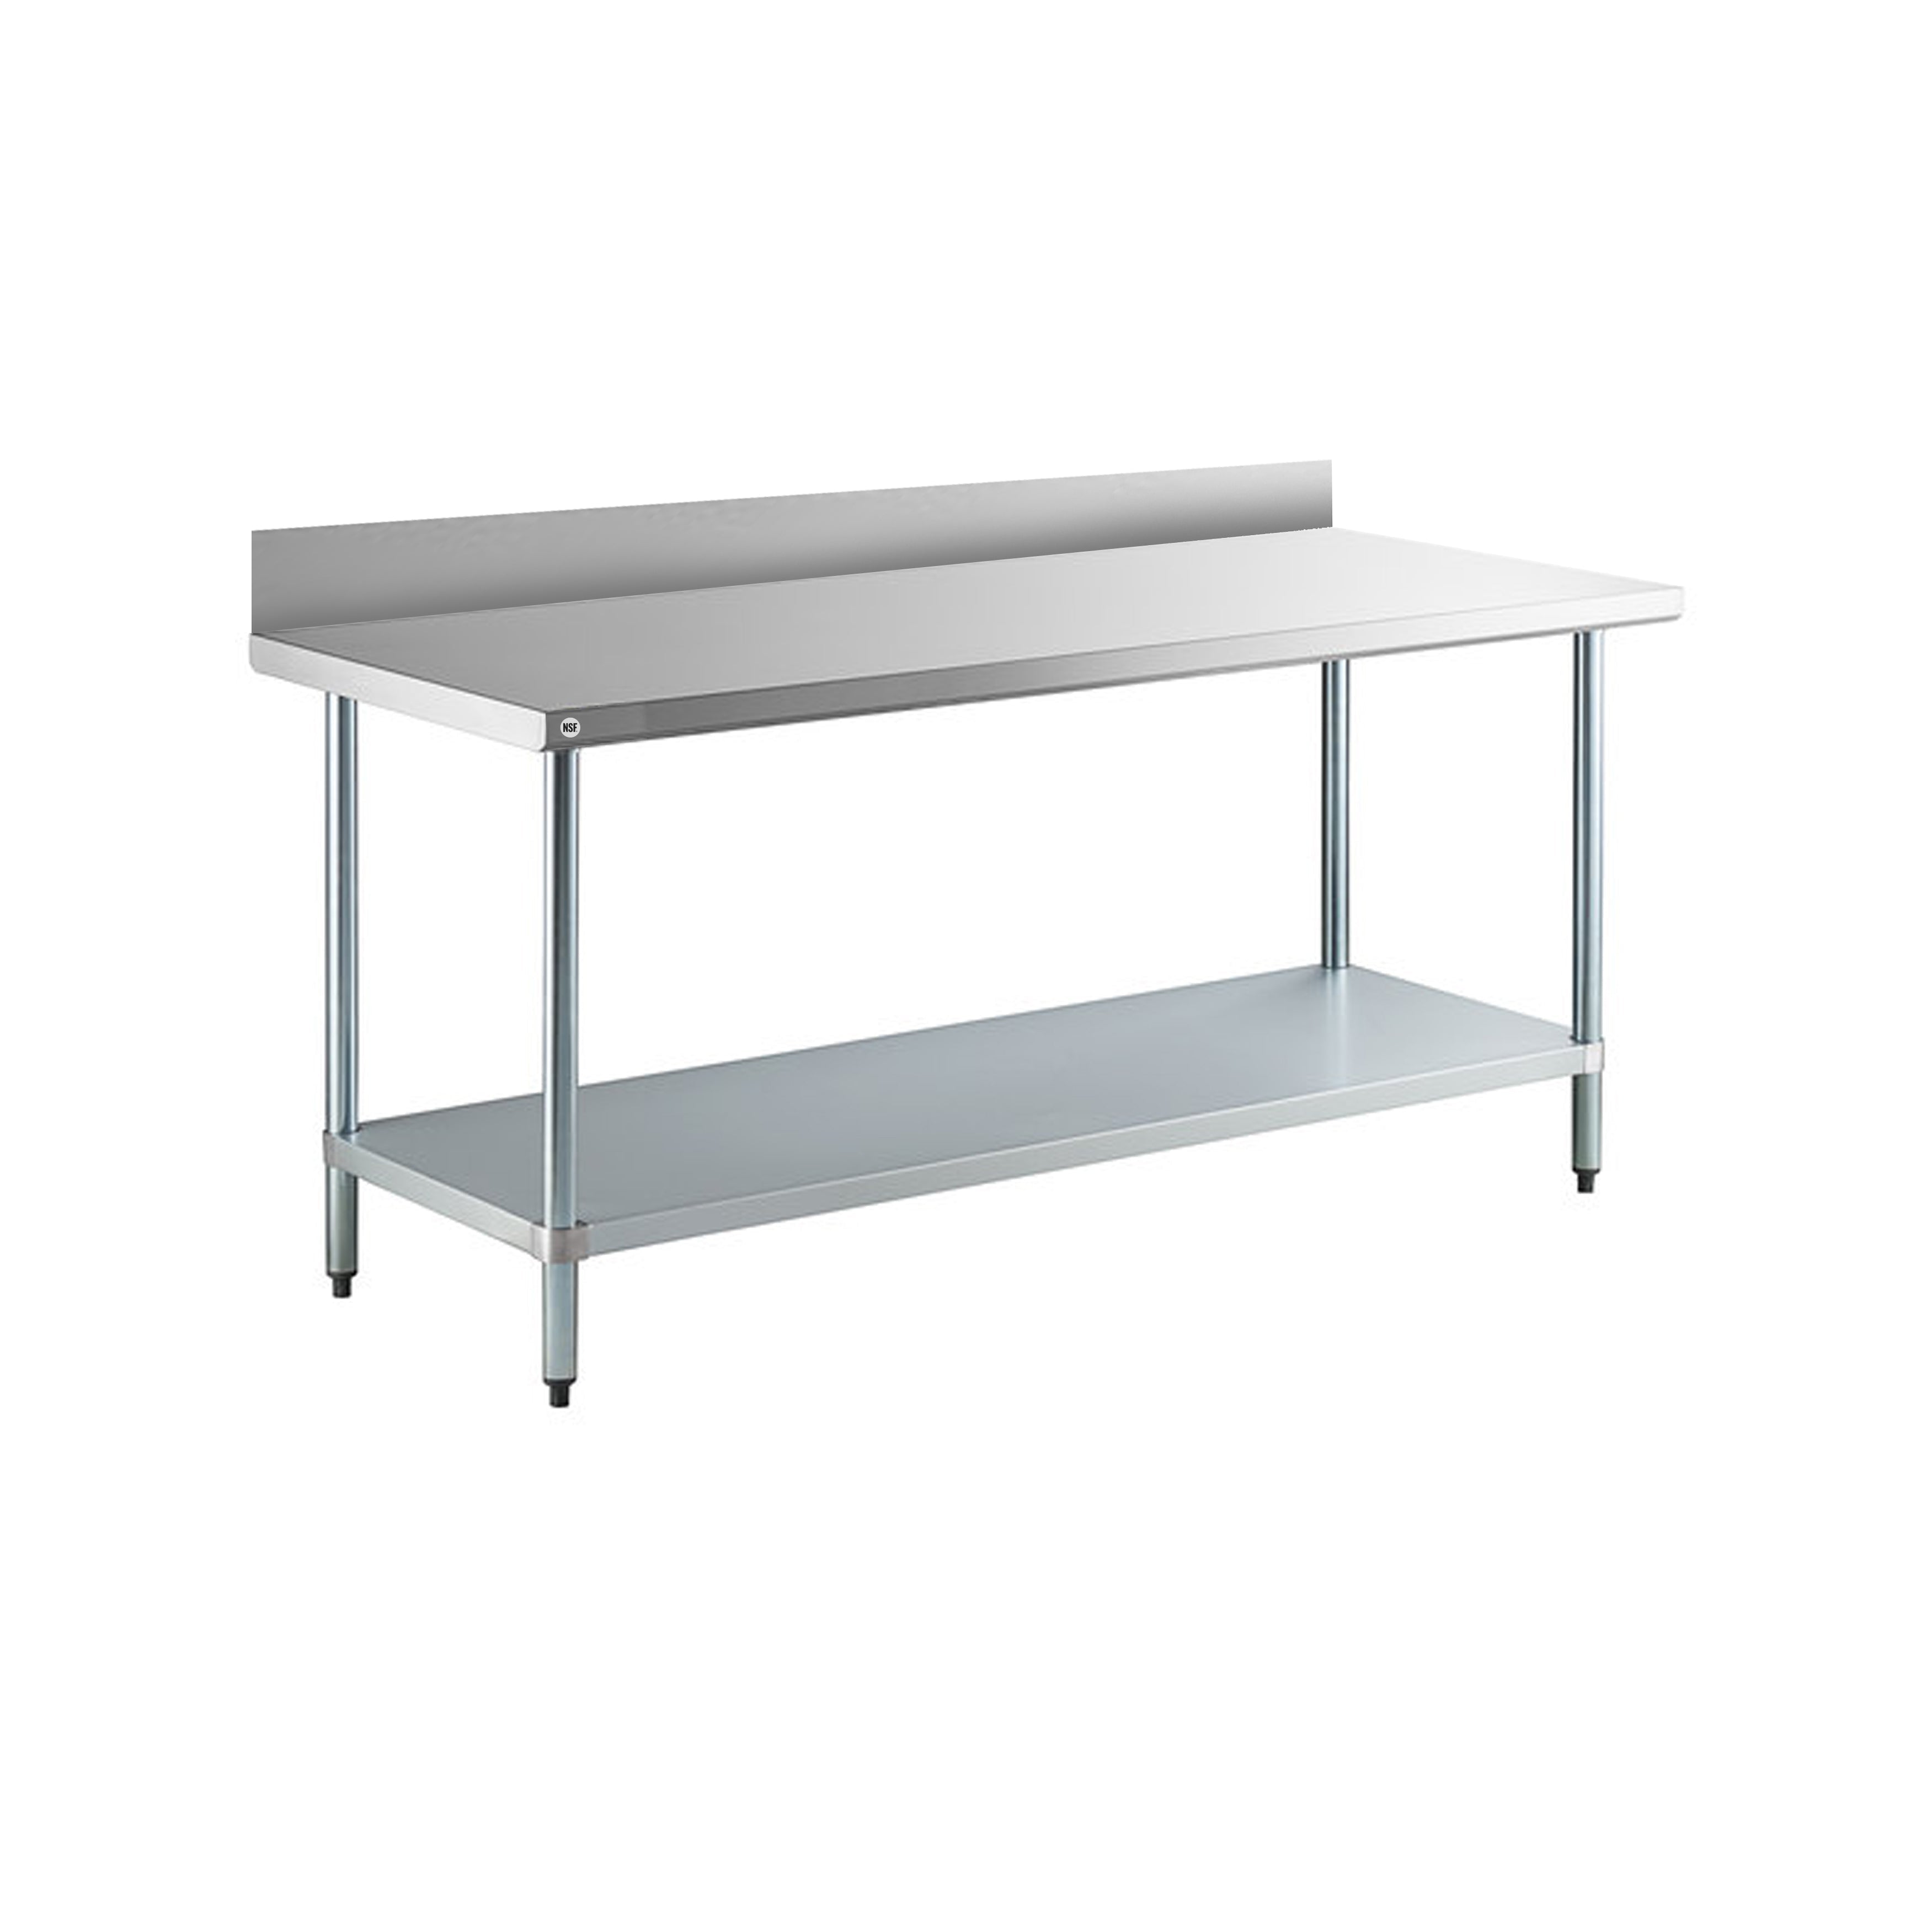 Omcan - 22081, Commercial 24" x 48" Stainless Steel Kitchen Work Table with 4" BackSplash 1000lbs Light Duty